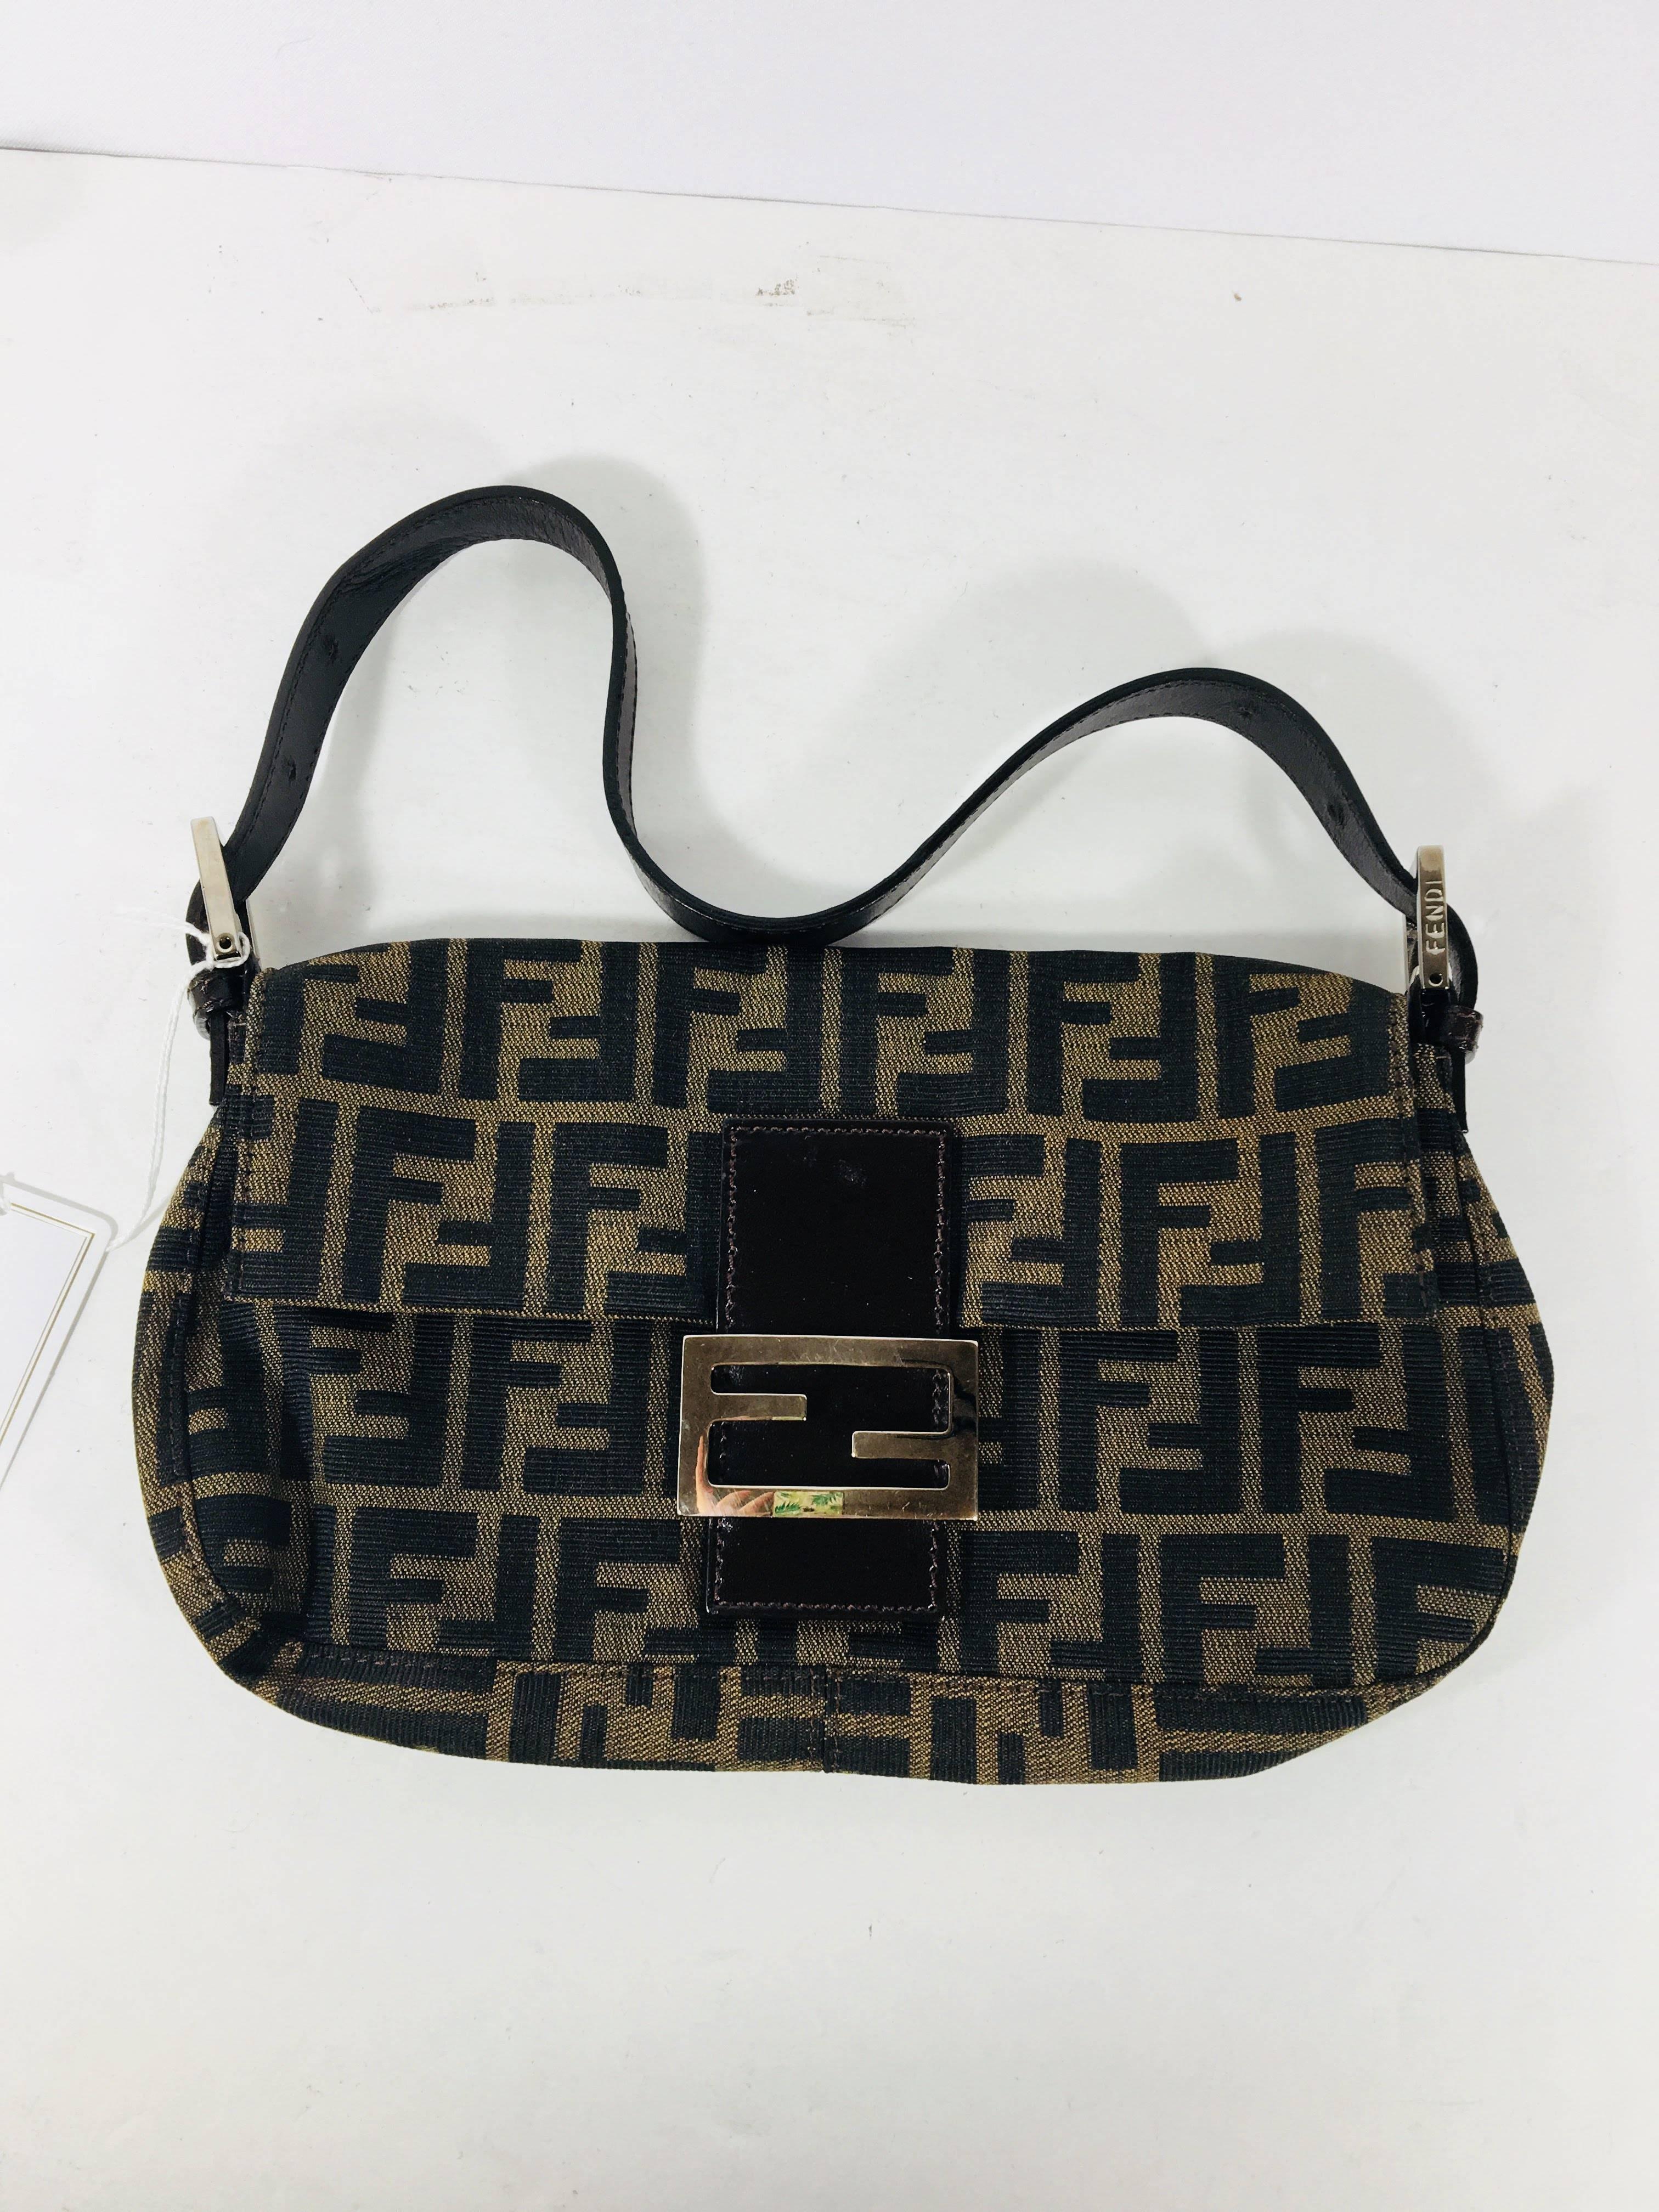 Fendi Small Zucca Print Shoulder Bag with Leather Trim